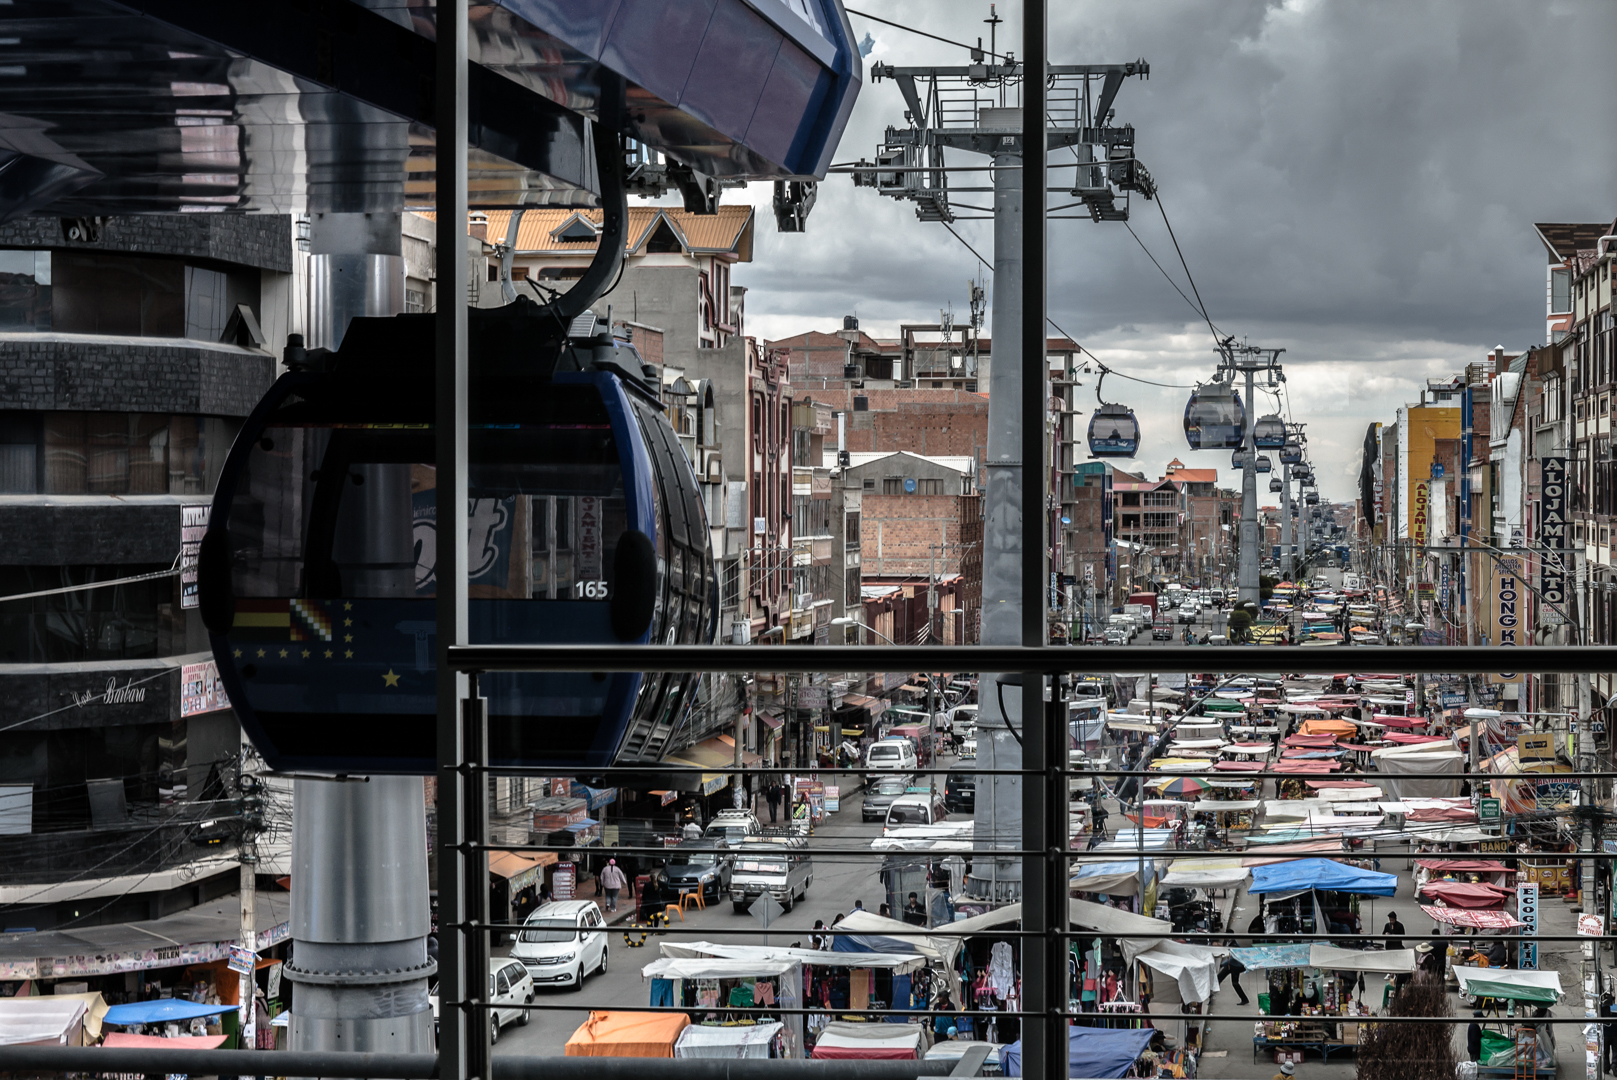 The aerial cable car transit system in Bolivia’s second largest city El Alto  